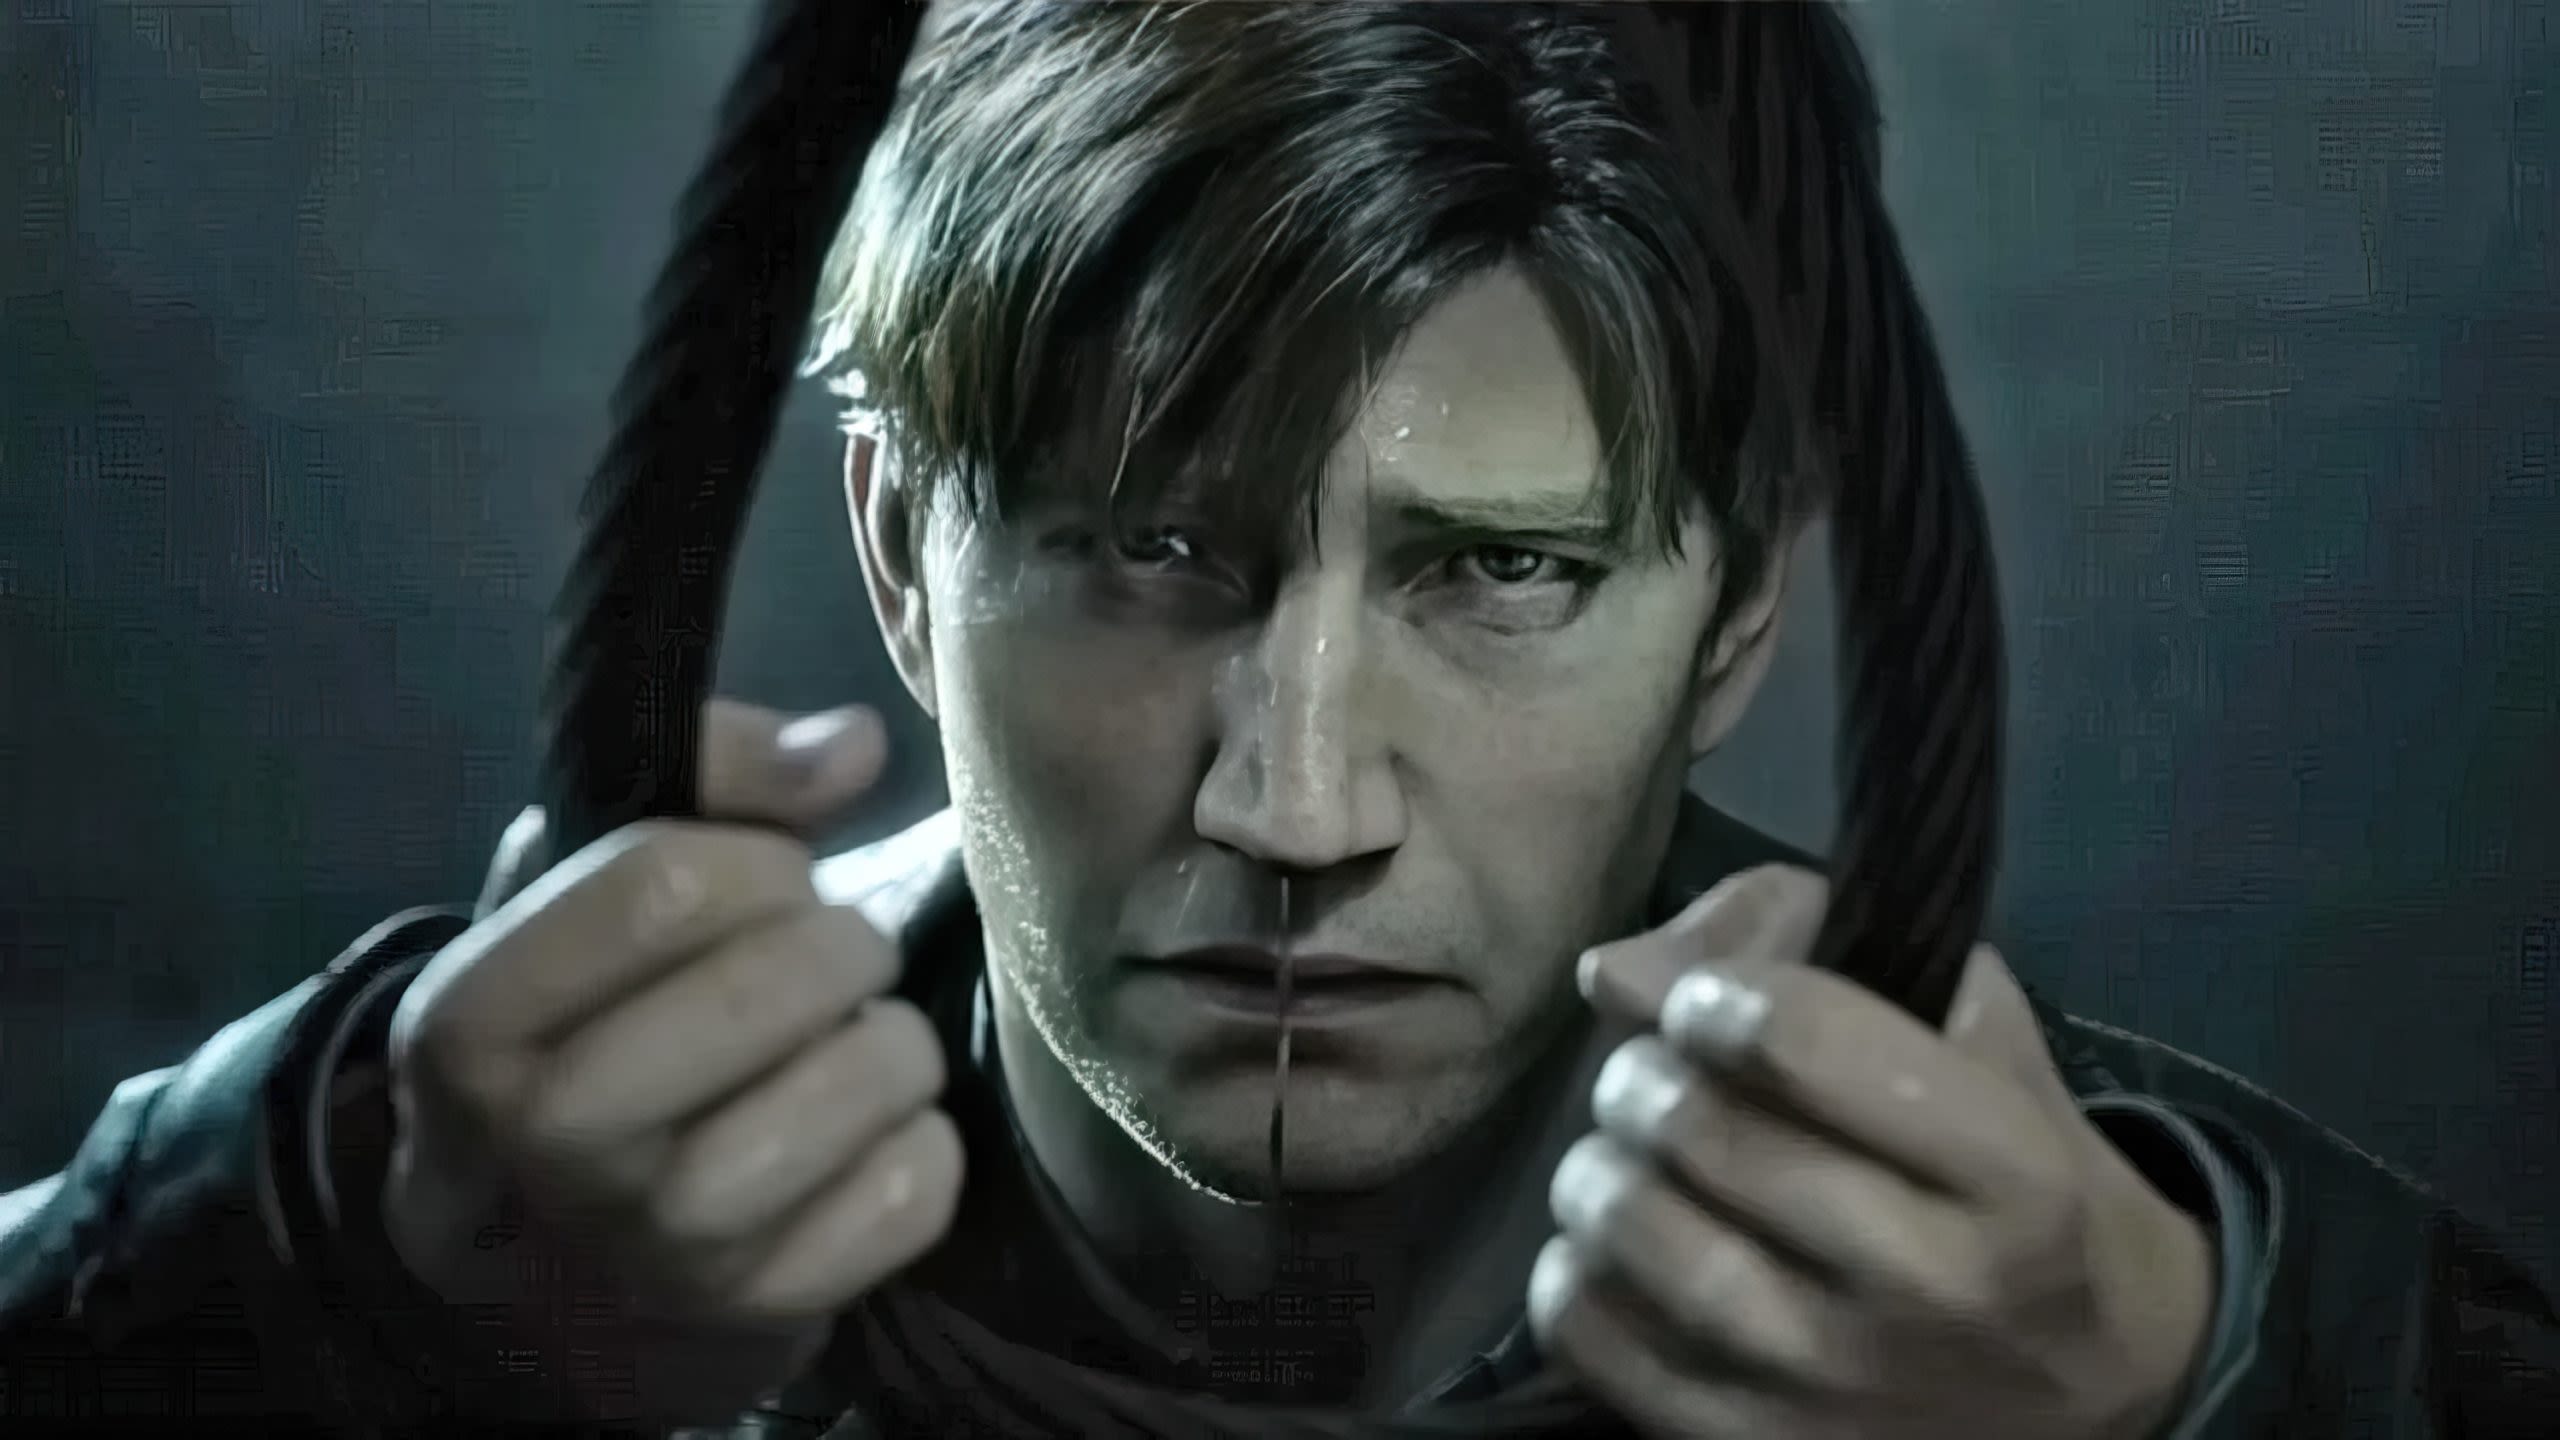 Silent Hill 2 Remake Launch Date Might Be Announced in 2 Days